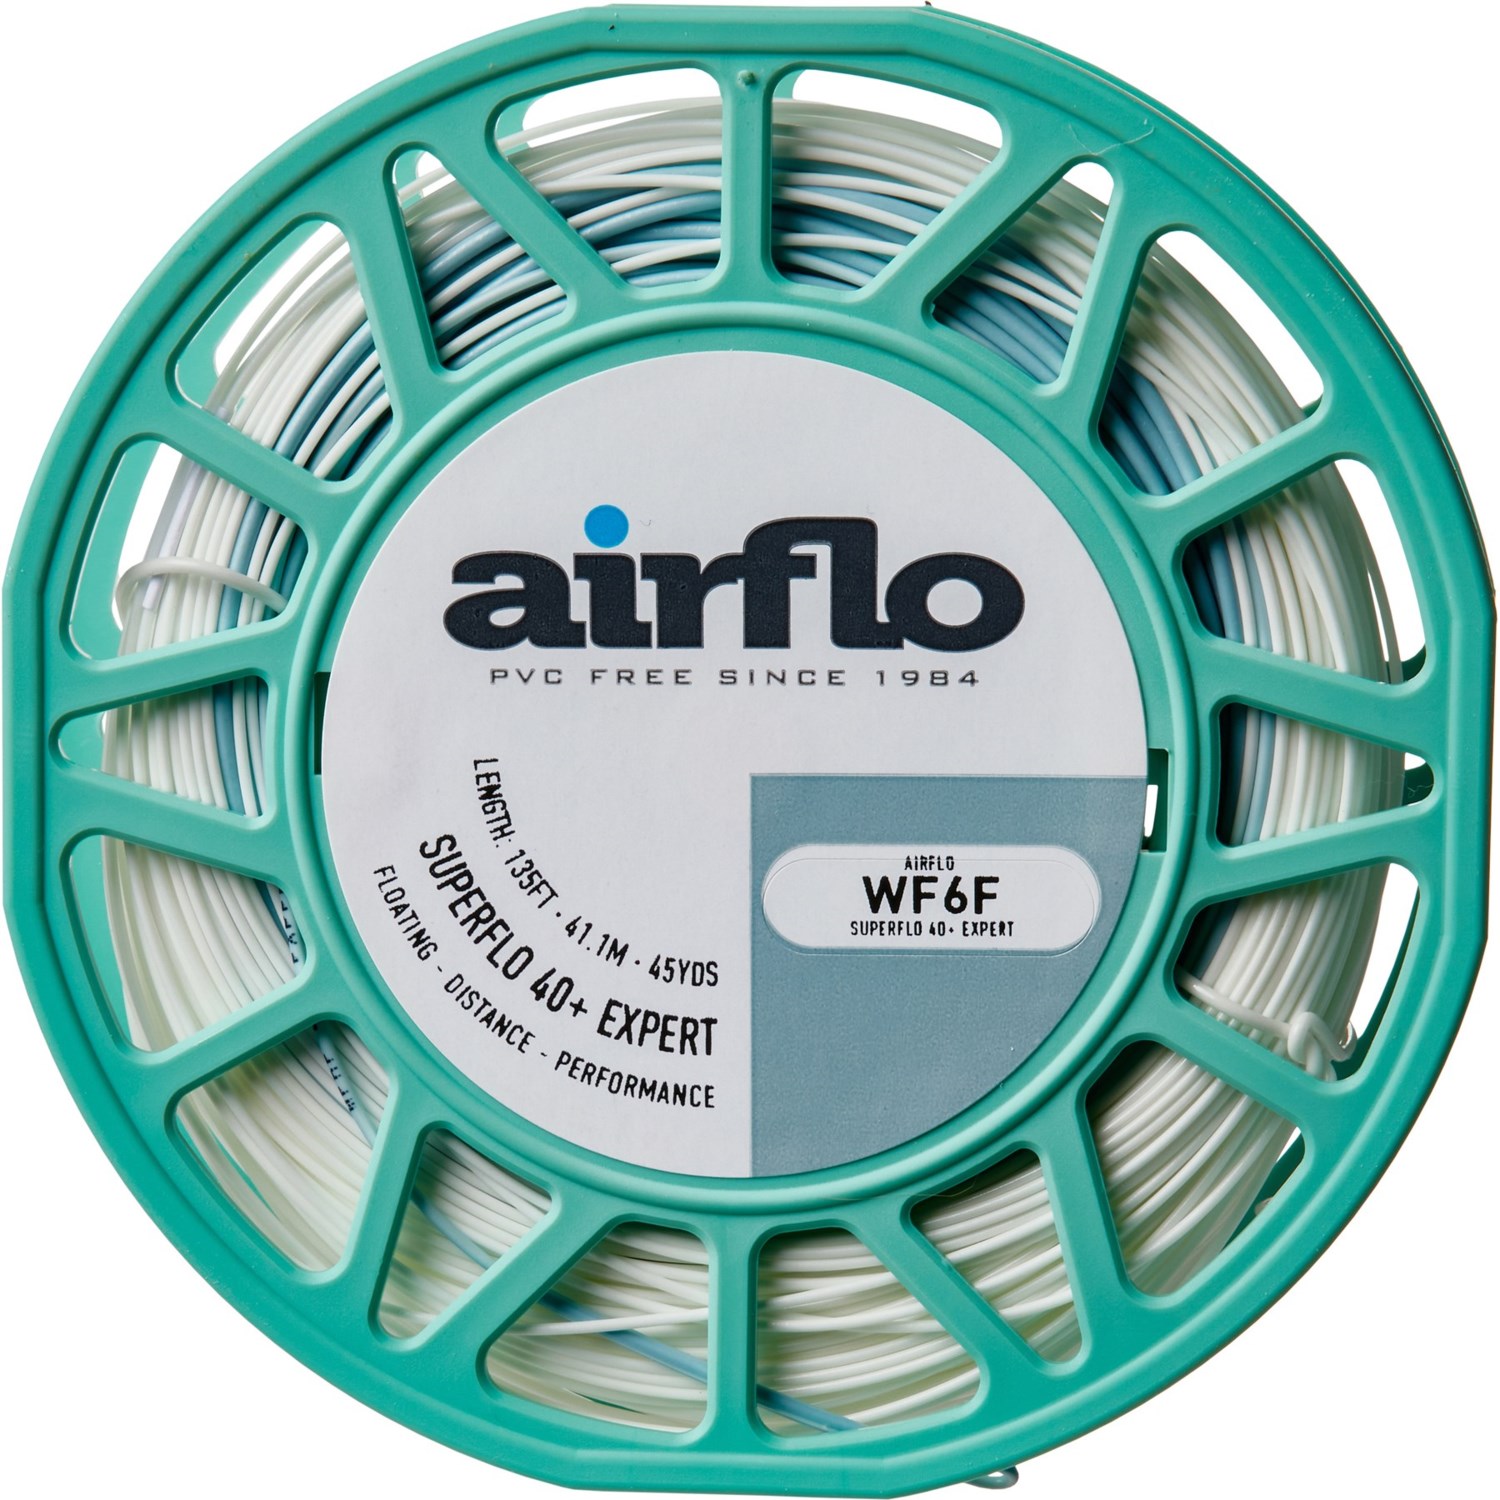 Airflo Superflo 40+ Expert Floating Saltwater Fly Line - WF6F - Save 50%